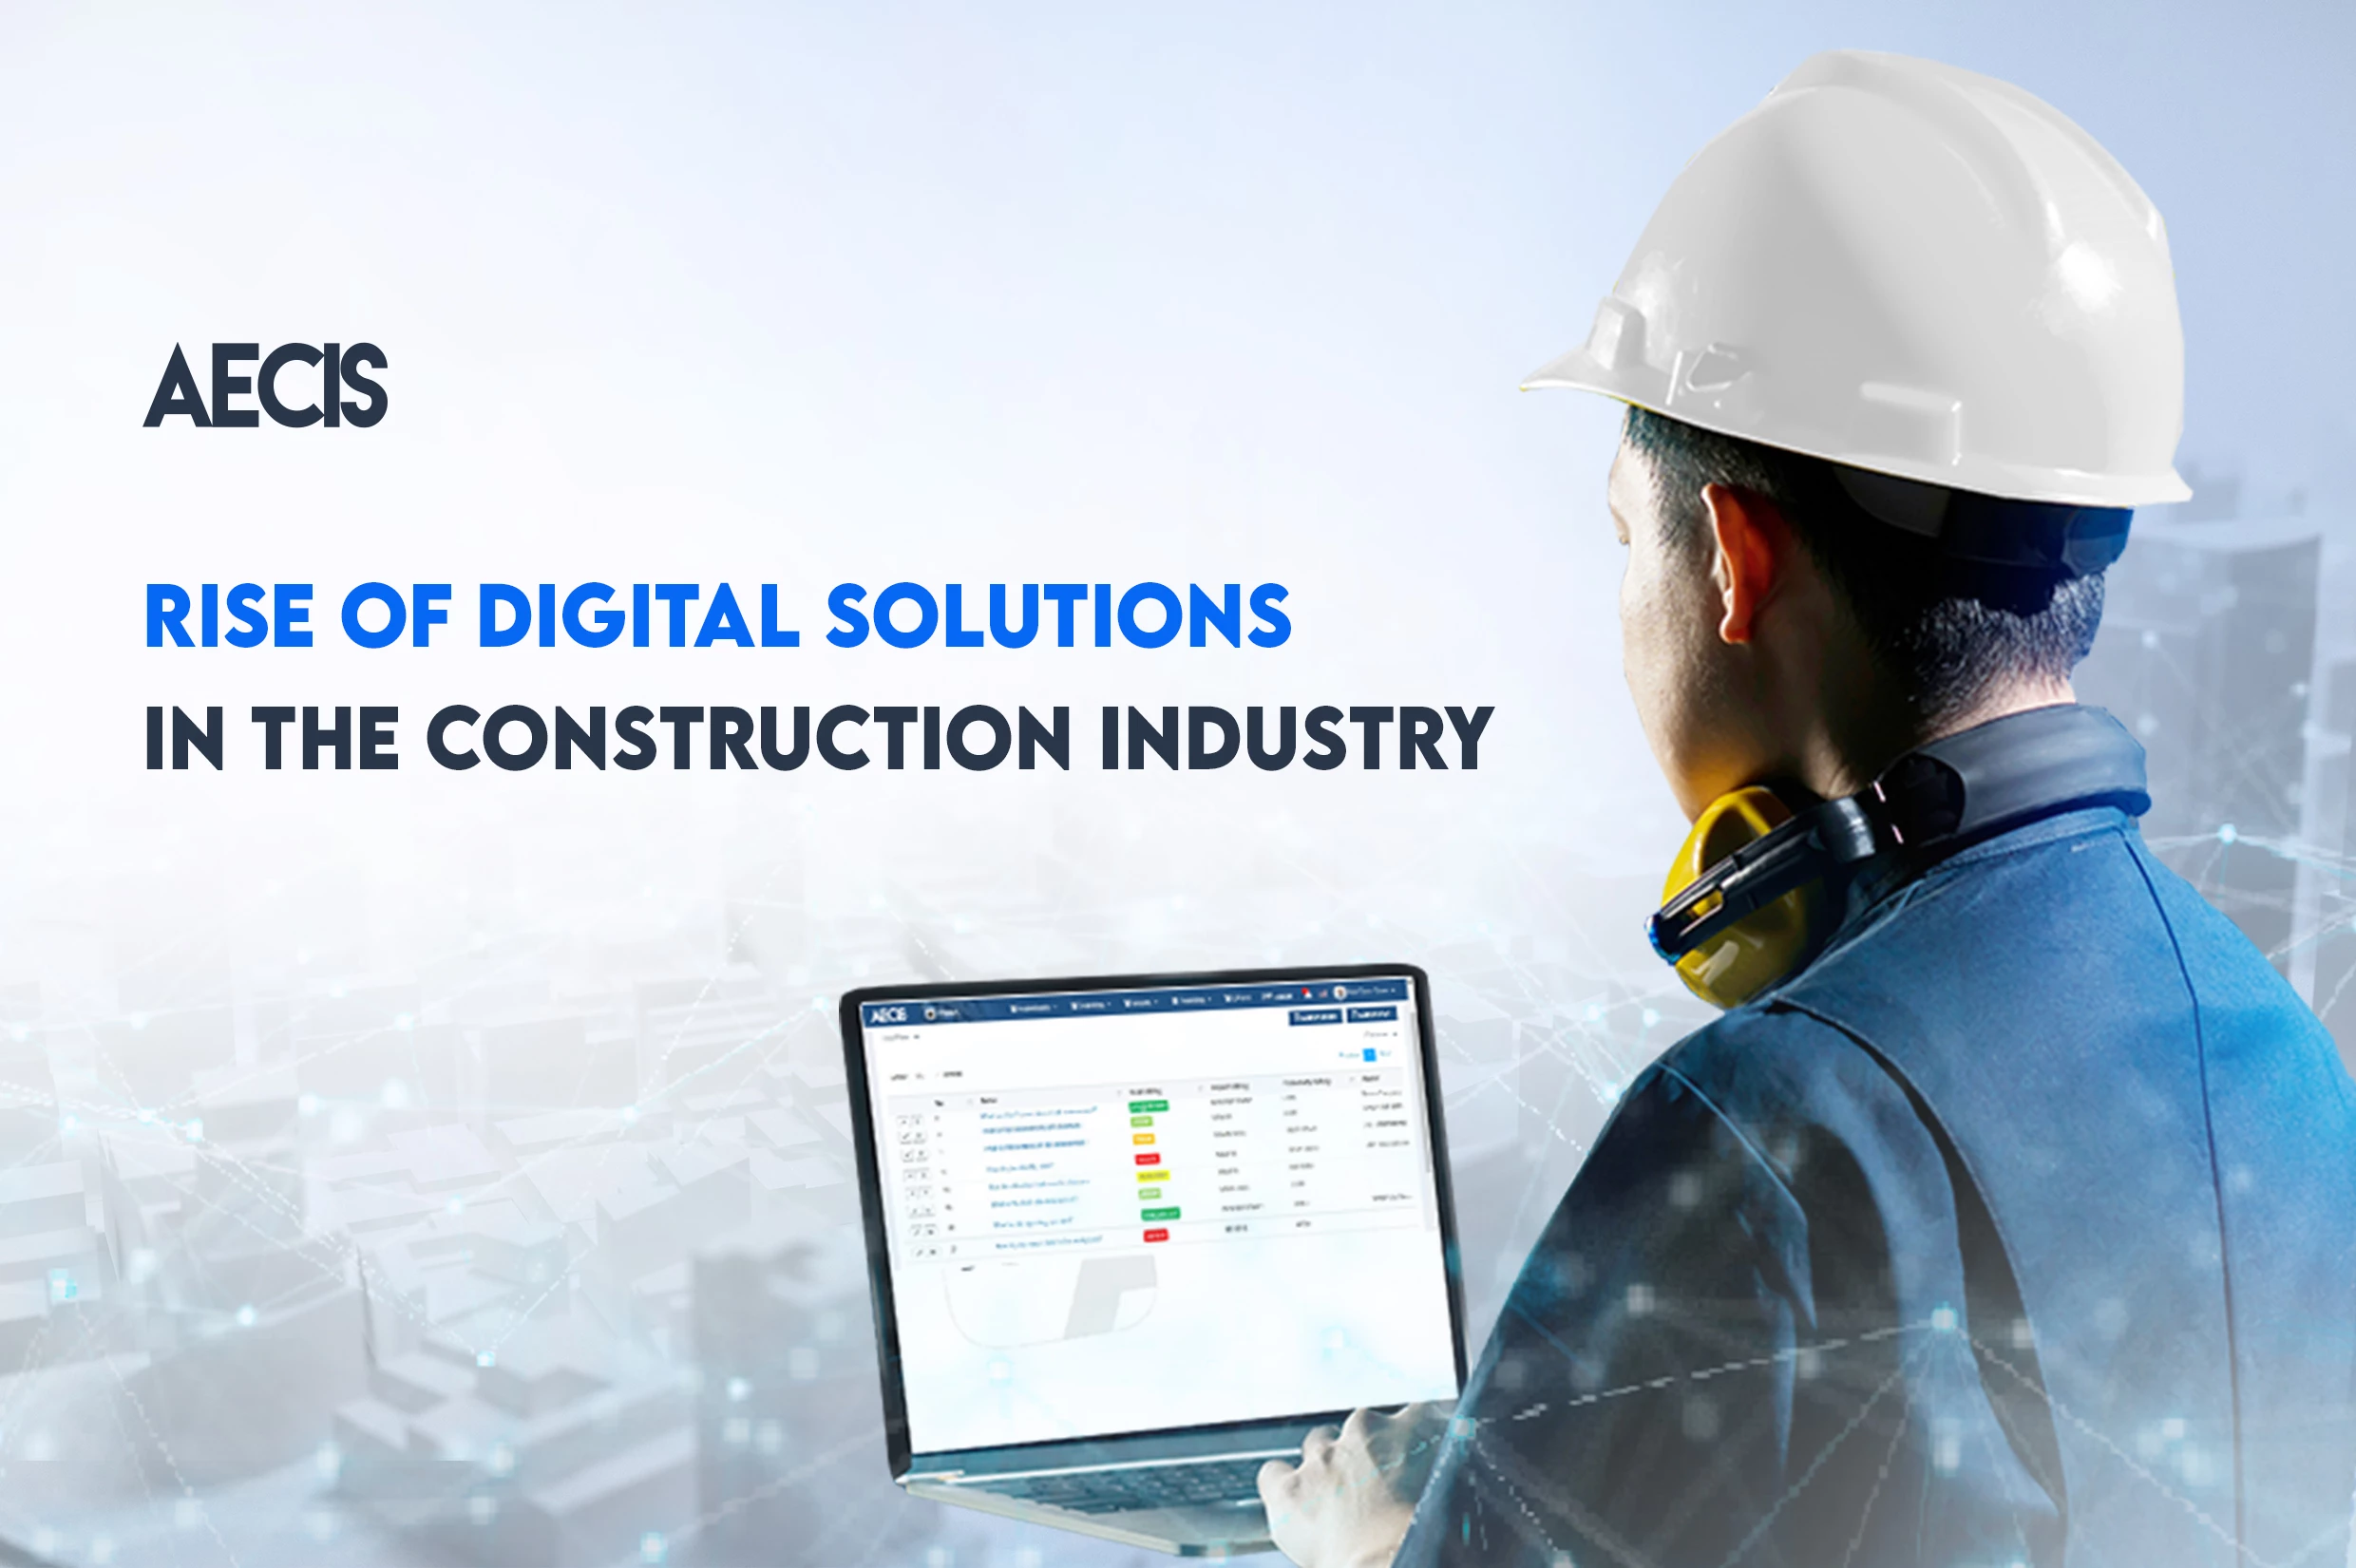 The rise of digital solutions in the construction